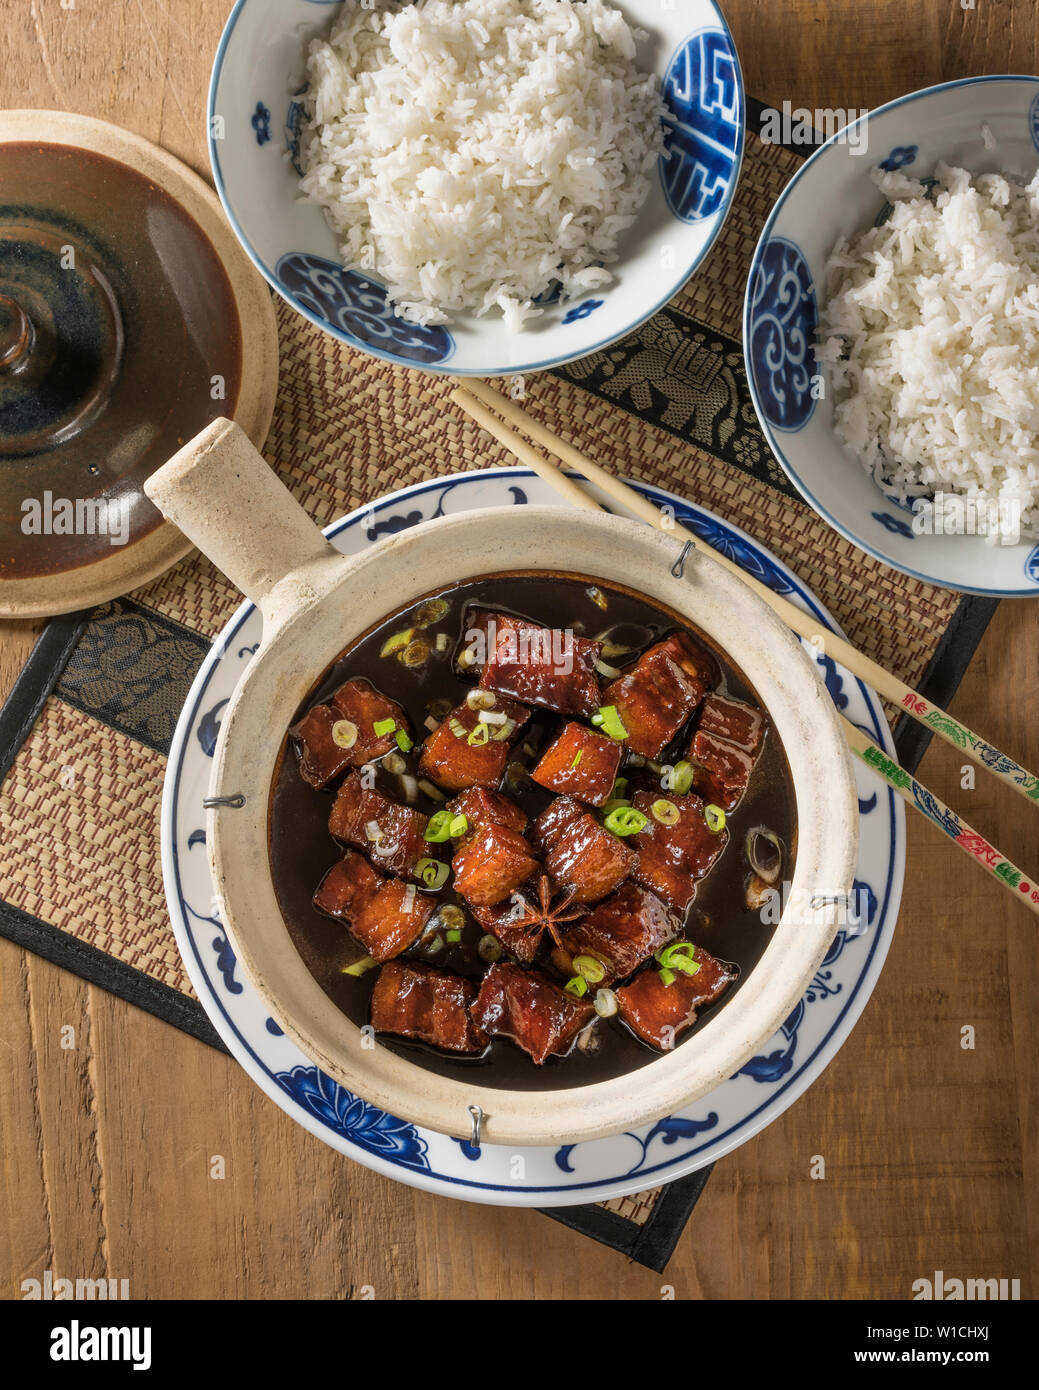 Hung shao pork. Shanghai style braised pork belly. Chinese food Stock Photo